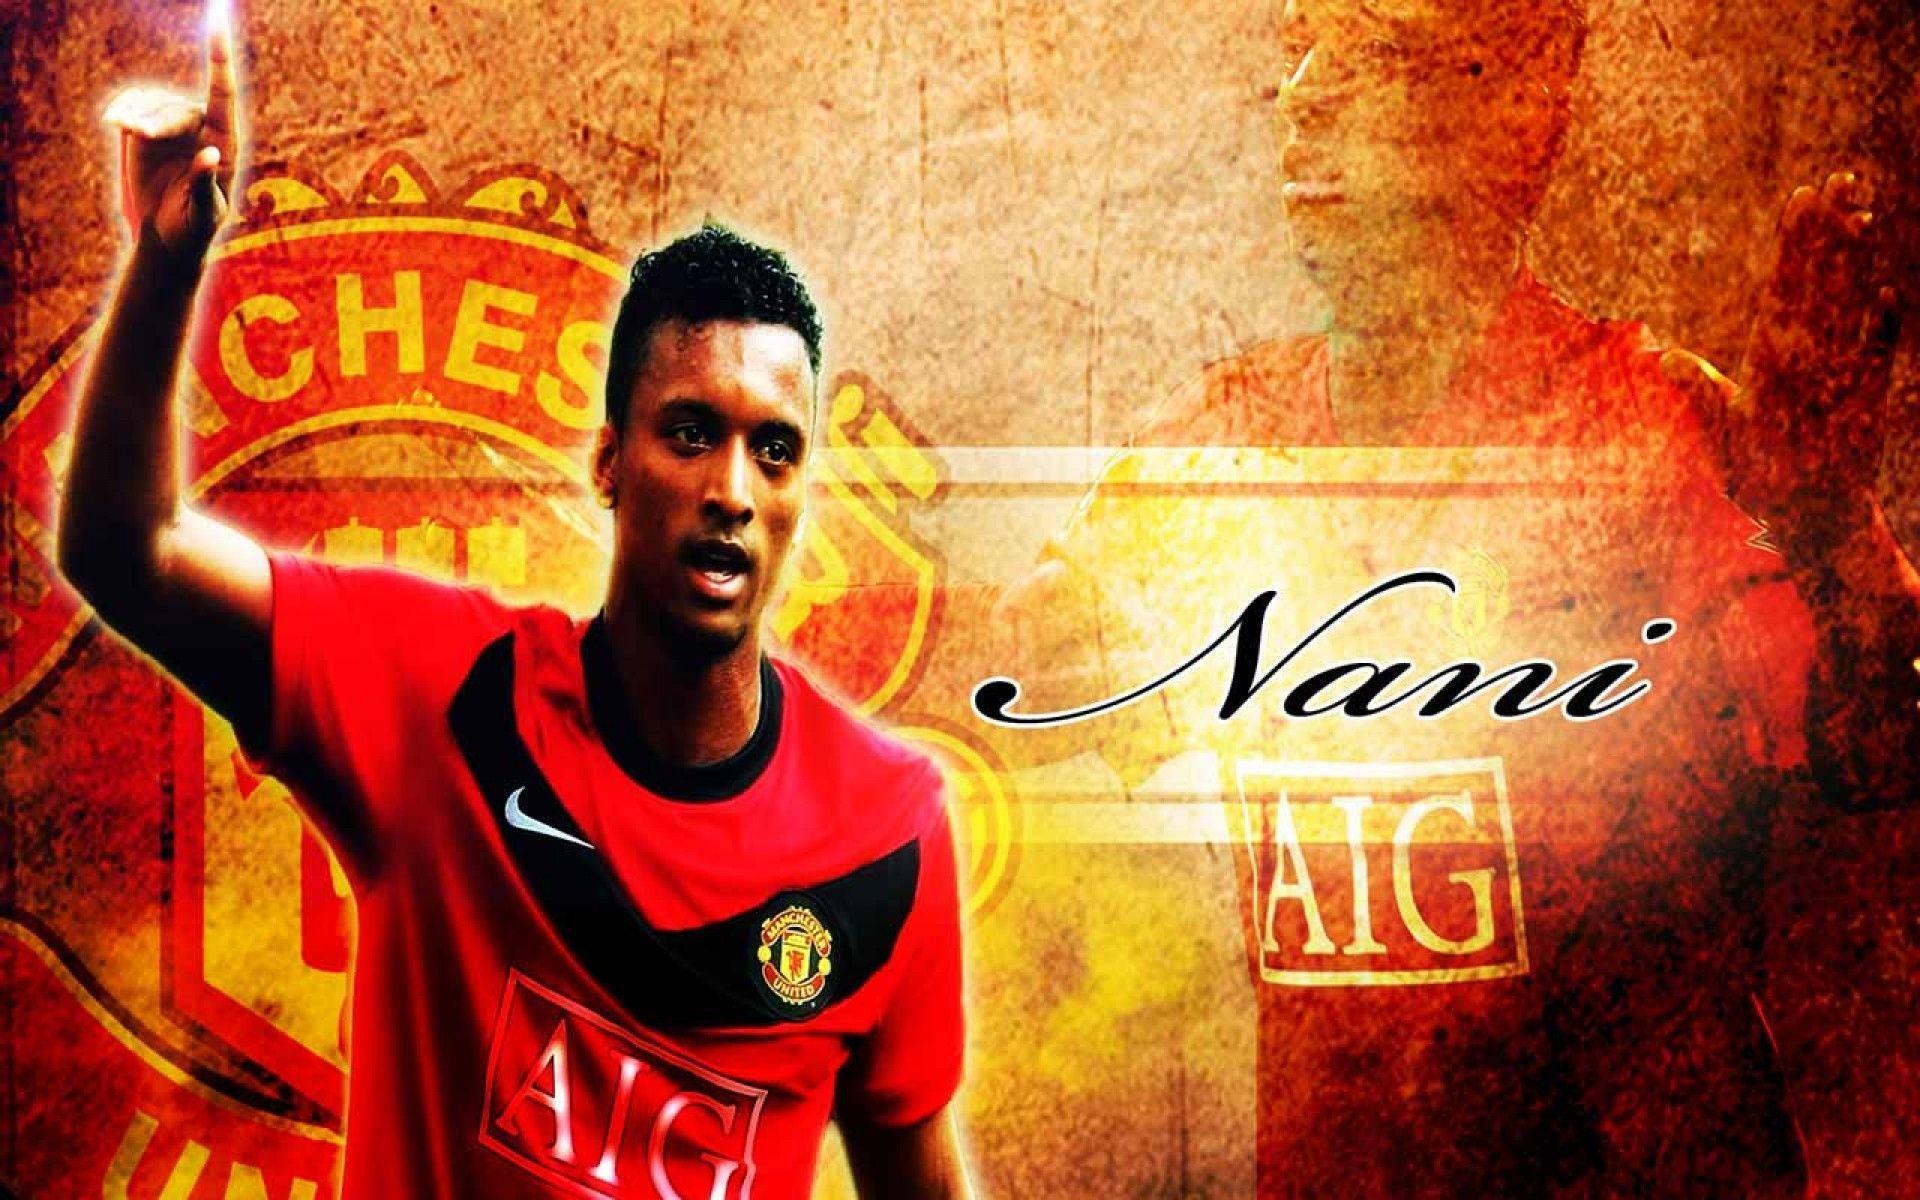 The football player of Manchester United Luis Nani wallpaper